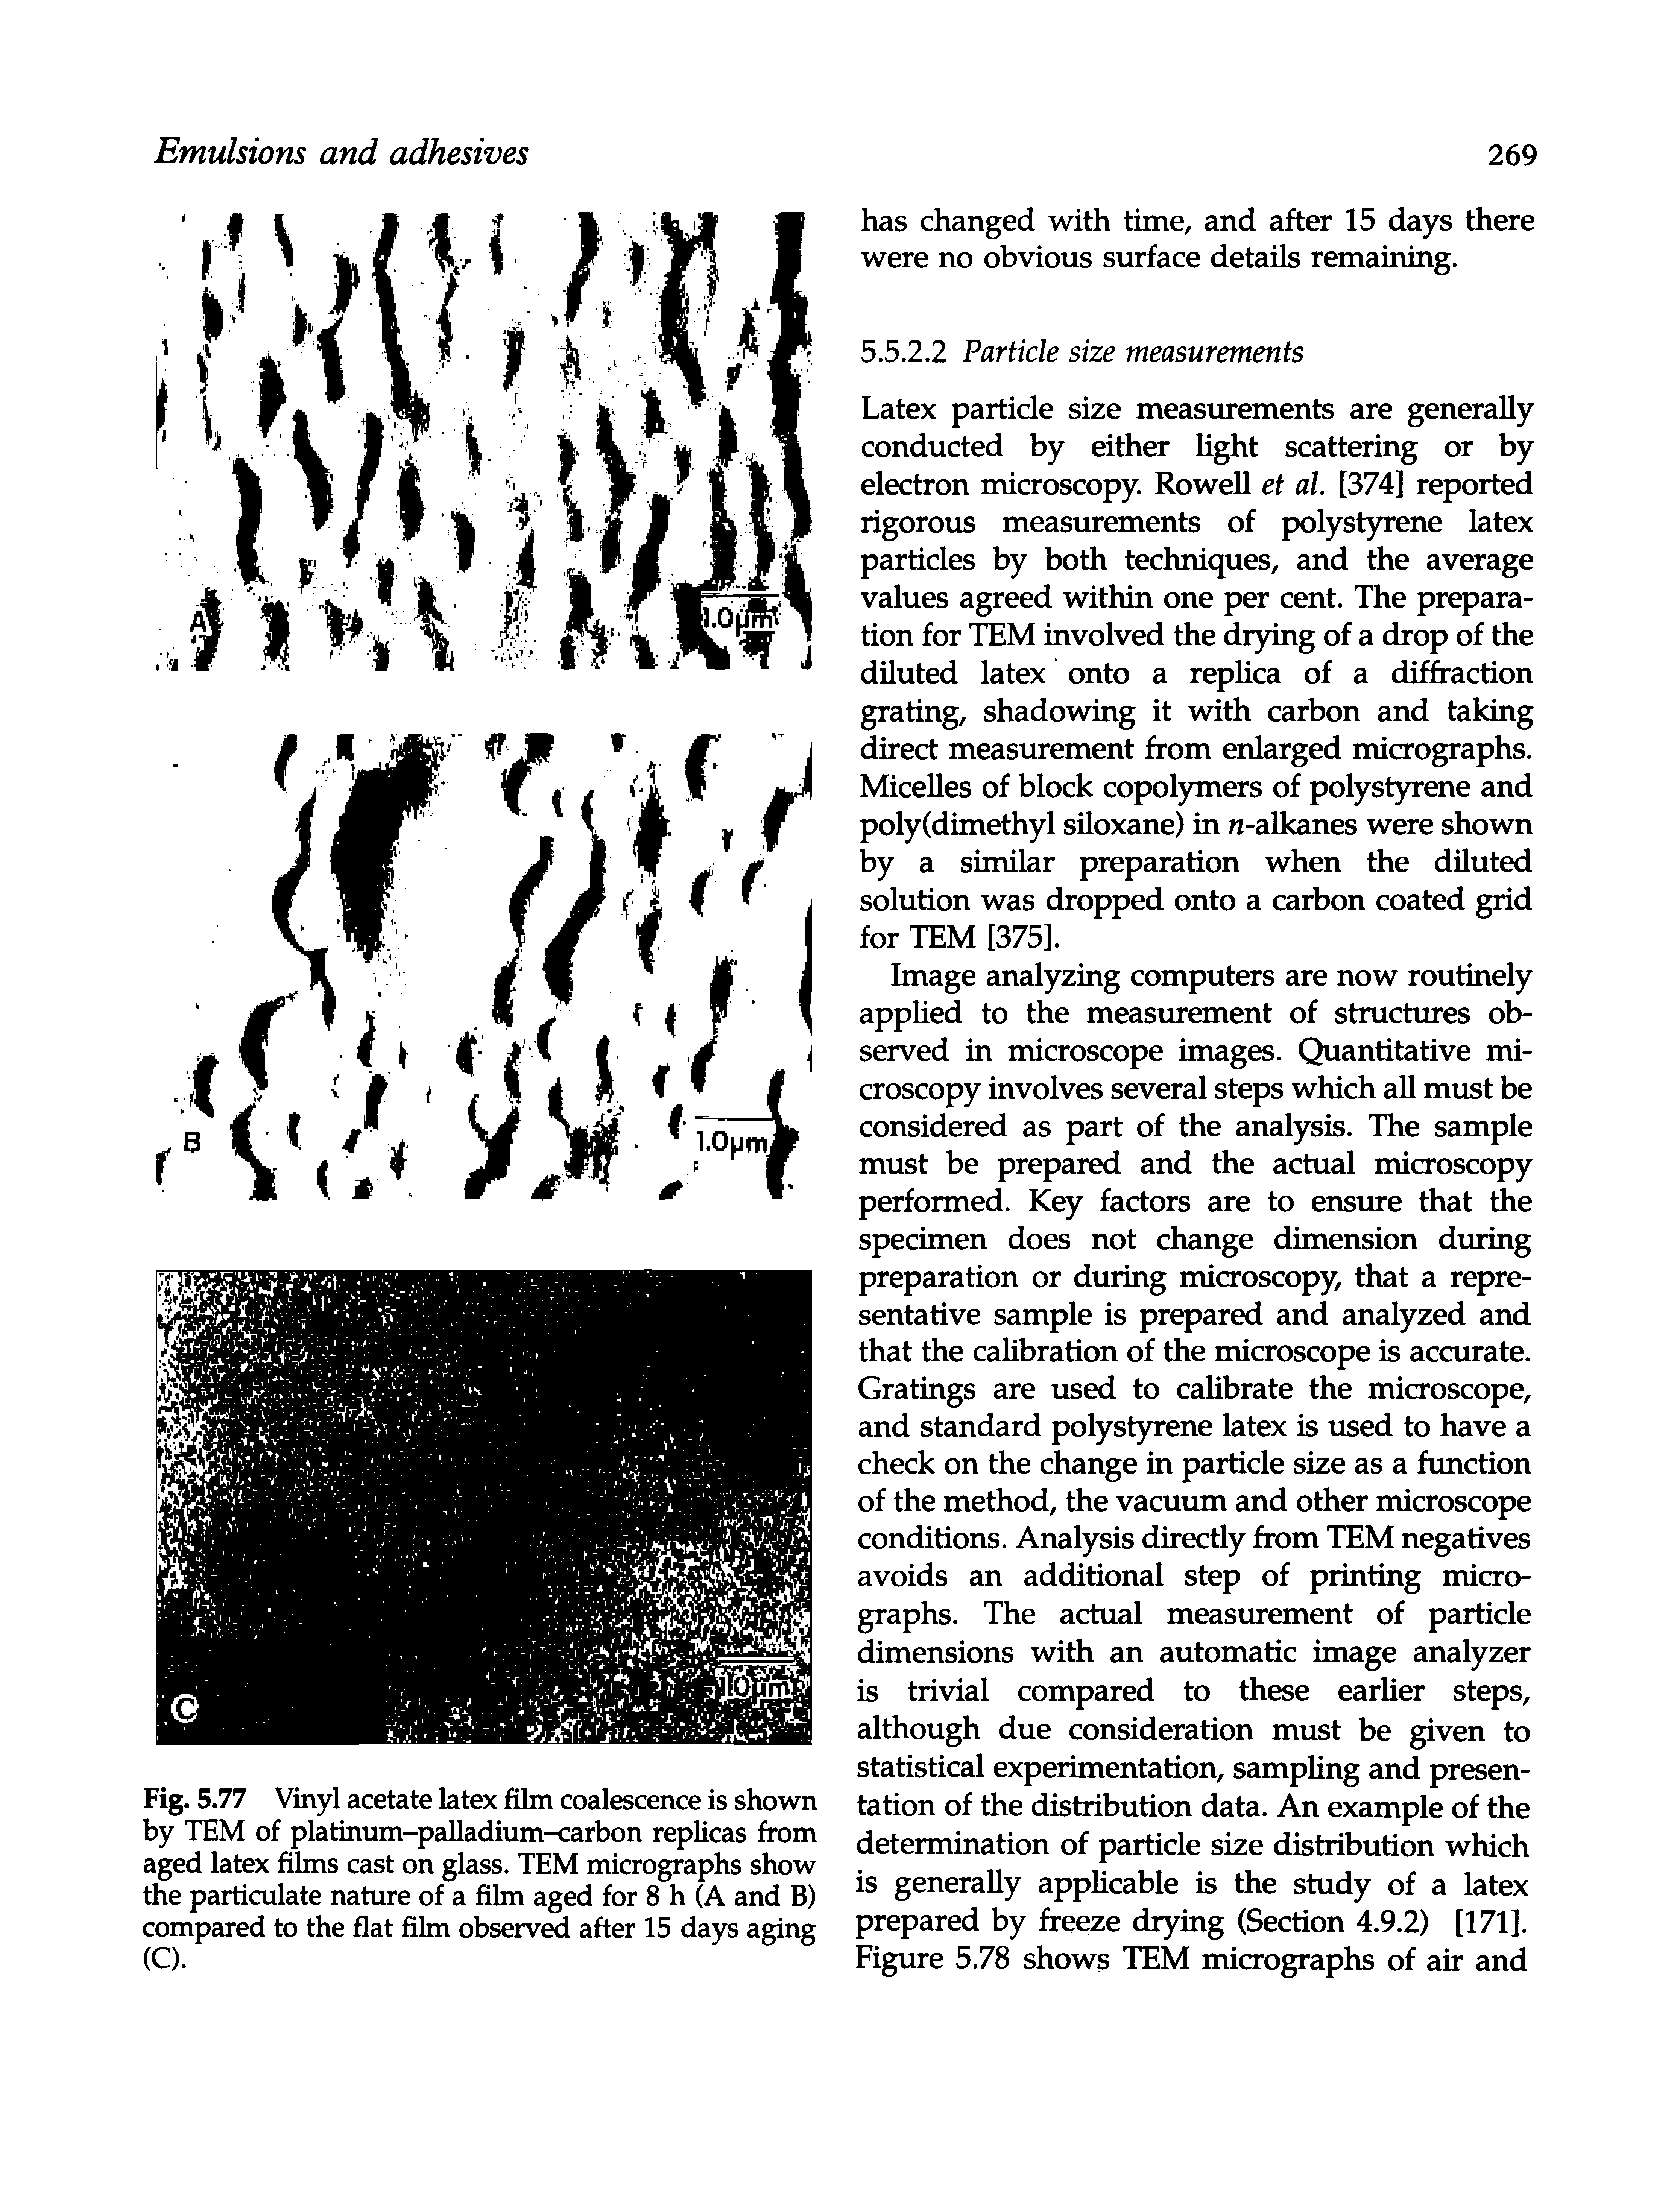 Fig. 5.77 Vinyl acetate latex film coalescence is shown by TEM of platinum-palladium-carbon replicas from aged latex films cast on glass. TEM micrographs show the particulate nature of a film aged for 8 h (A and B) compared to the flat film observed after 15 days aging (C).